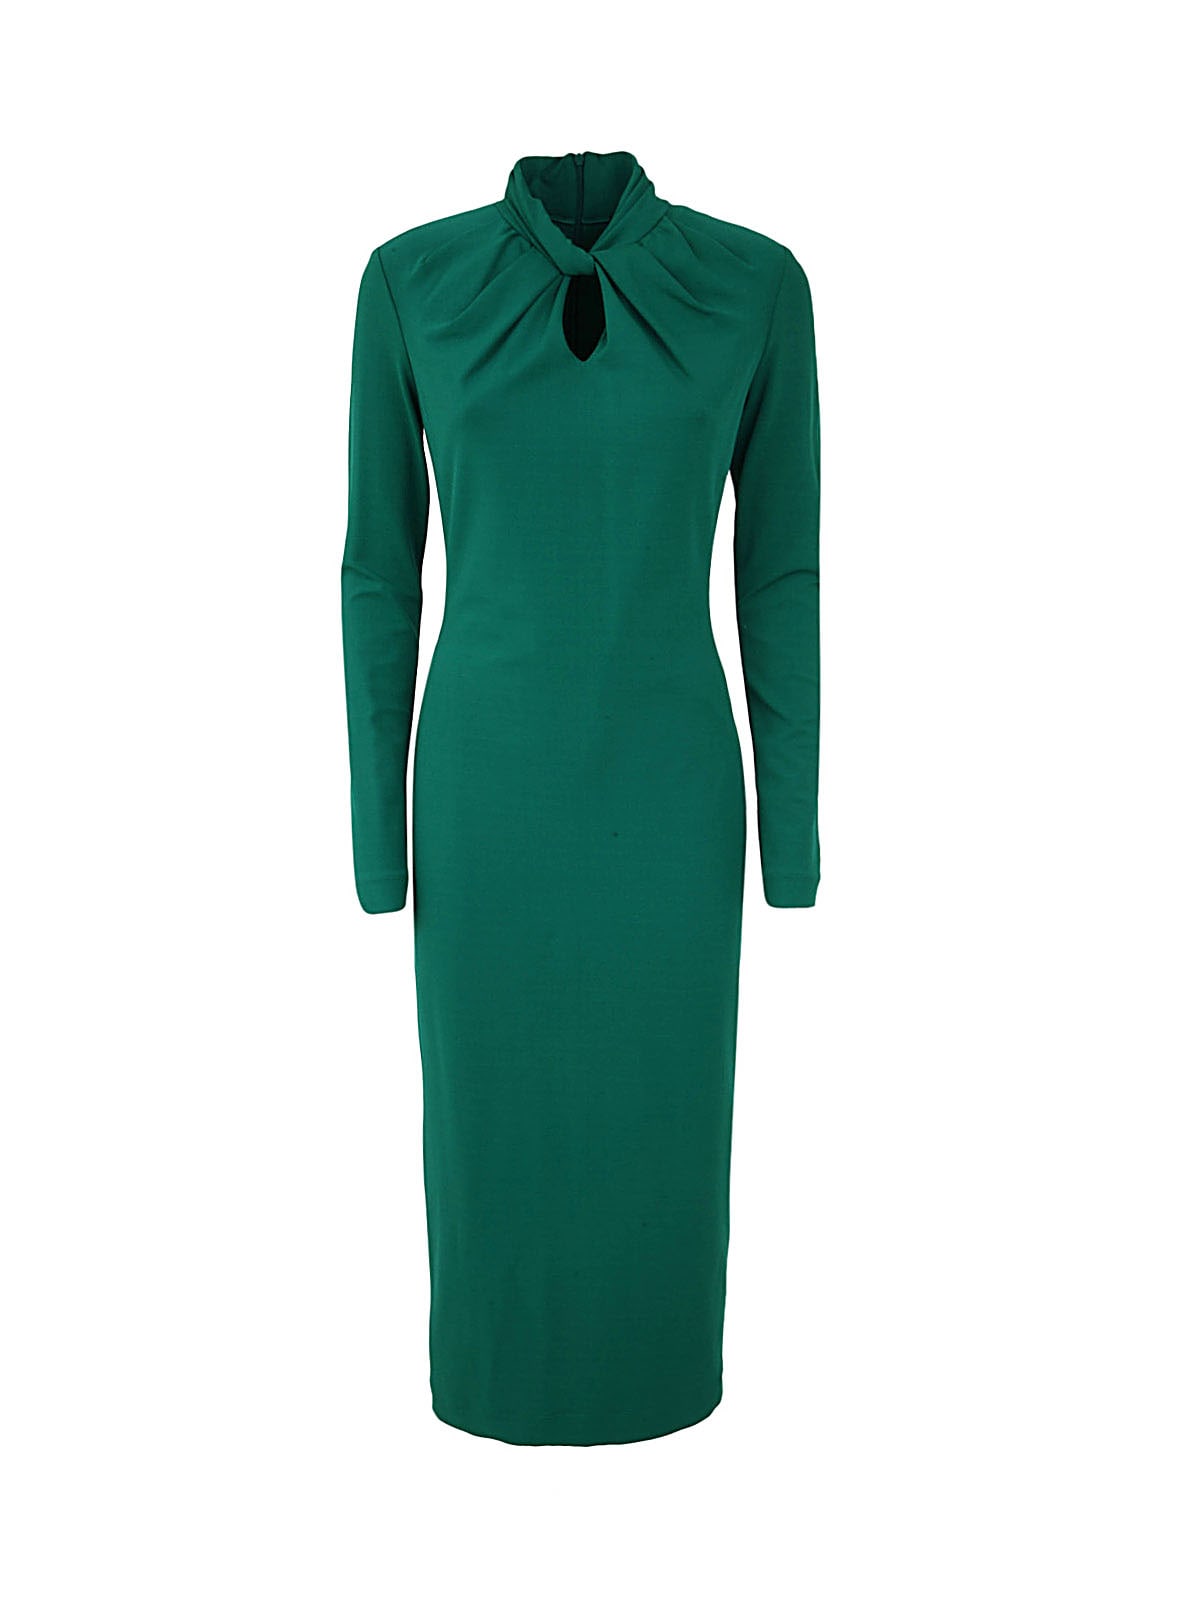 Giorgio Armani Stretch Jersey Dress With Cut Out Detail